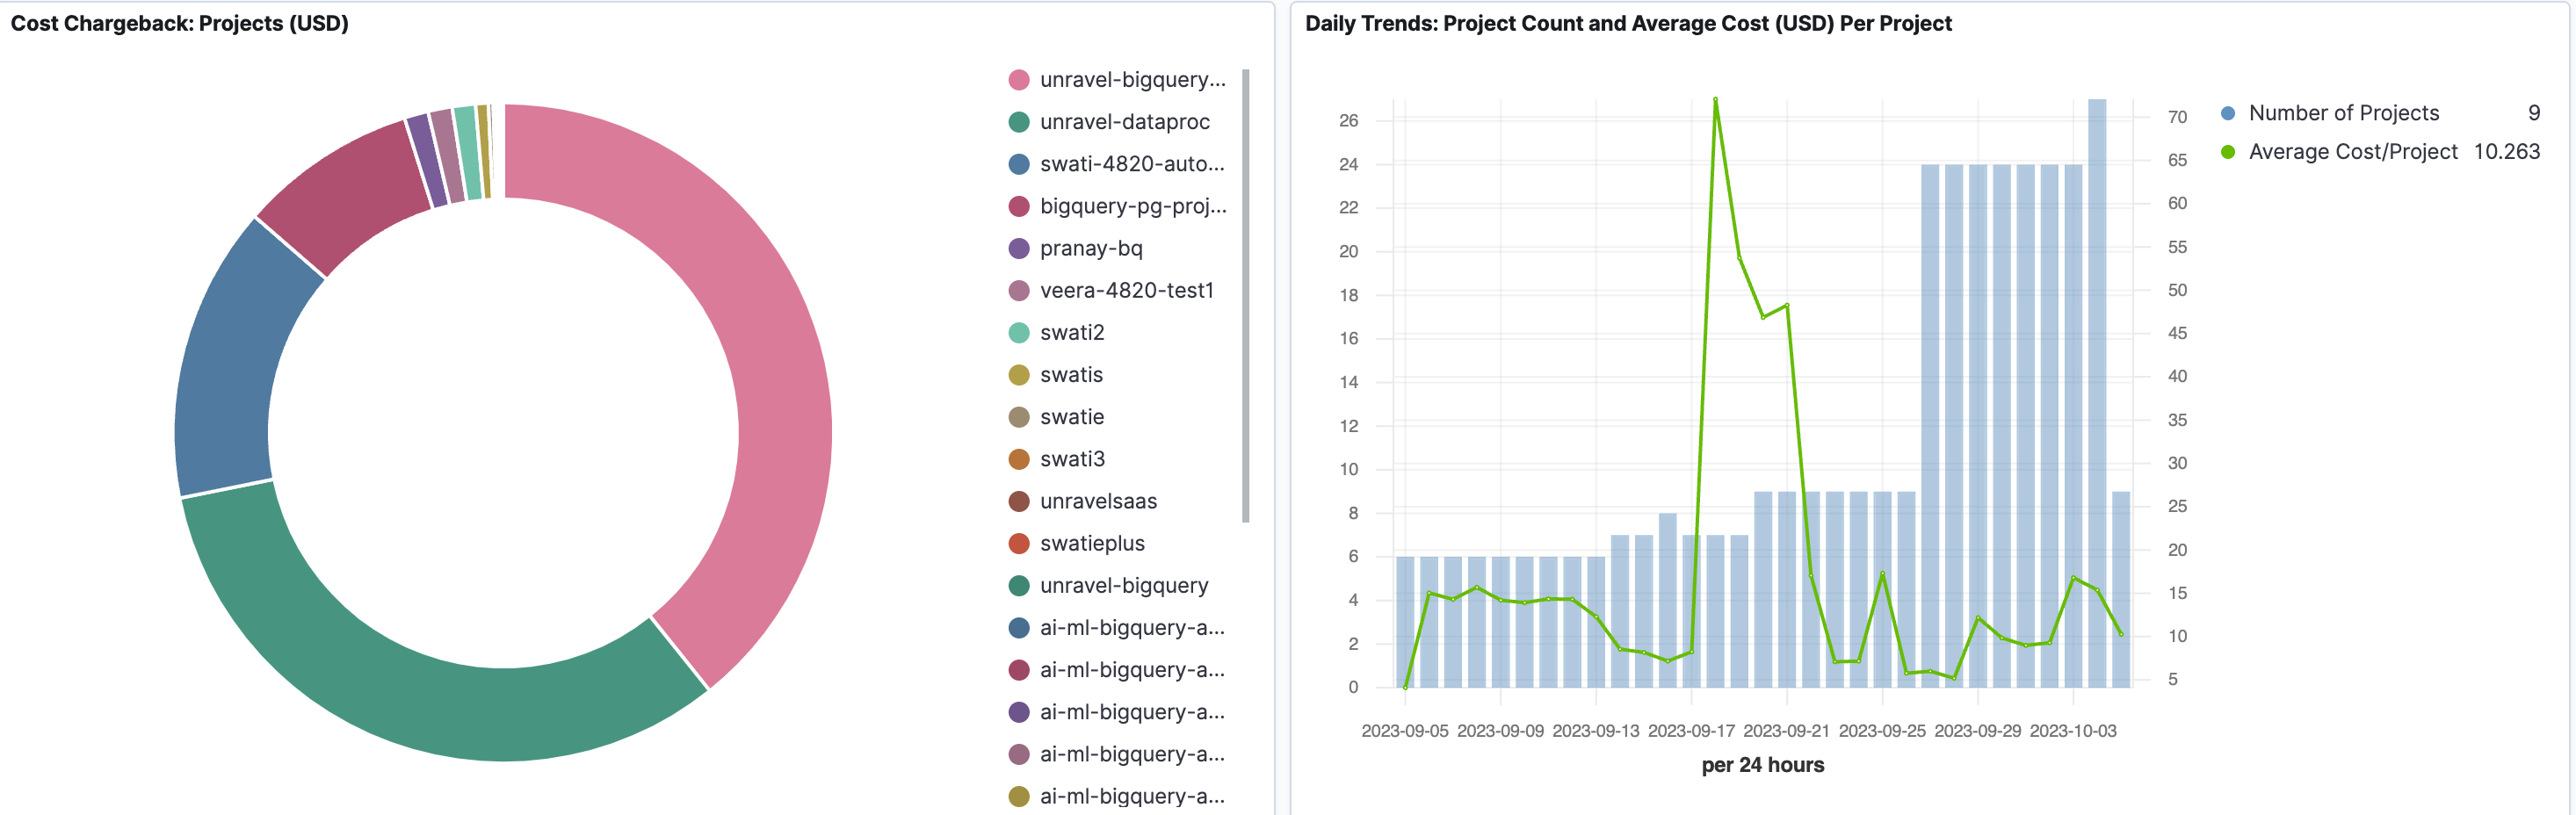 bigquery-project-cost-chargeback-trend.png